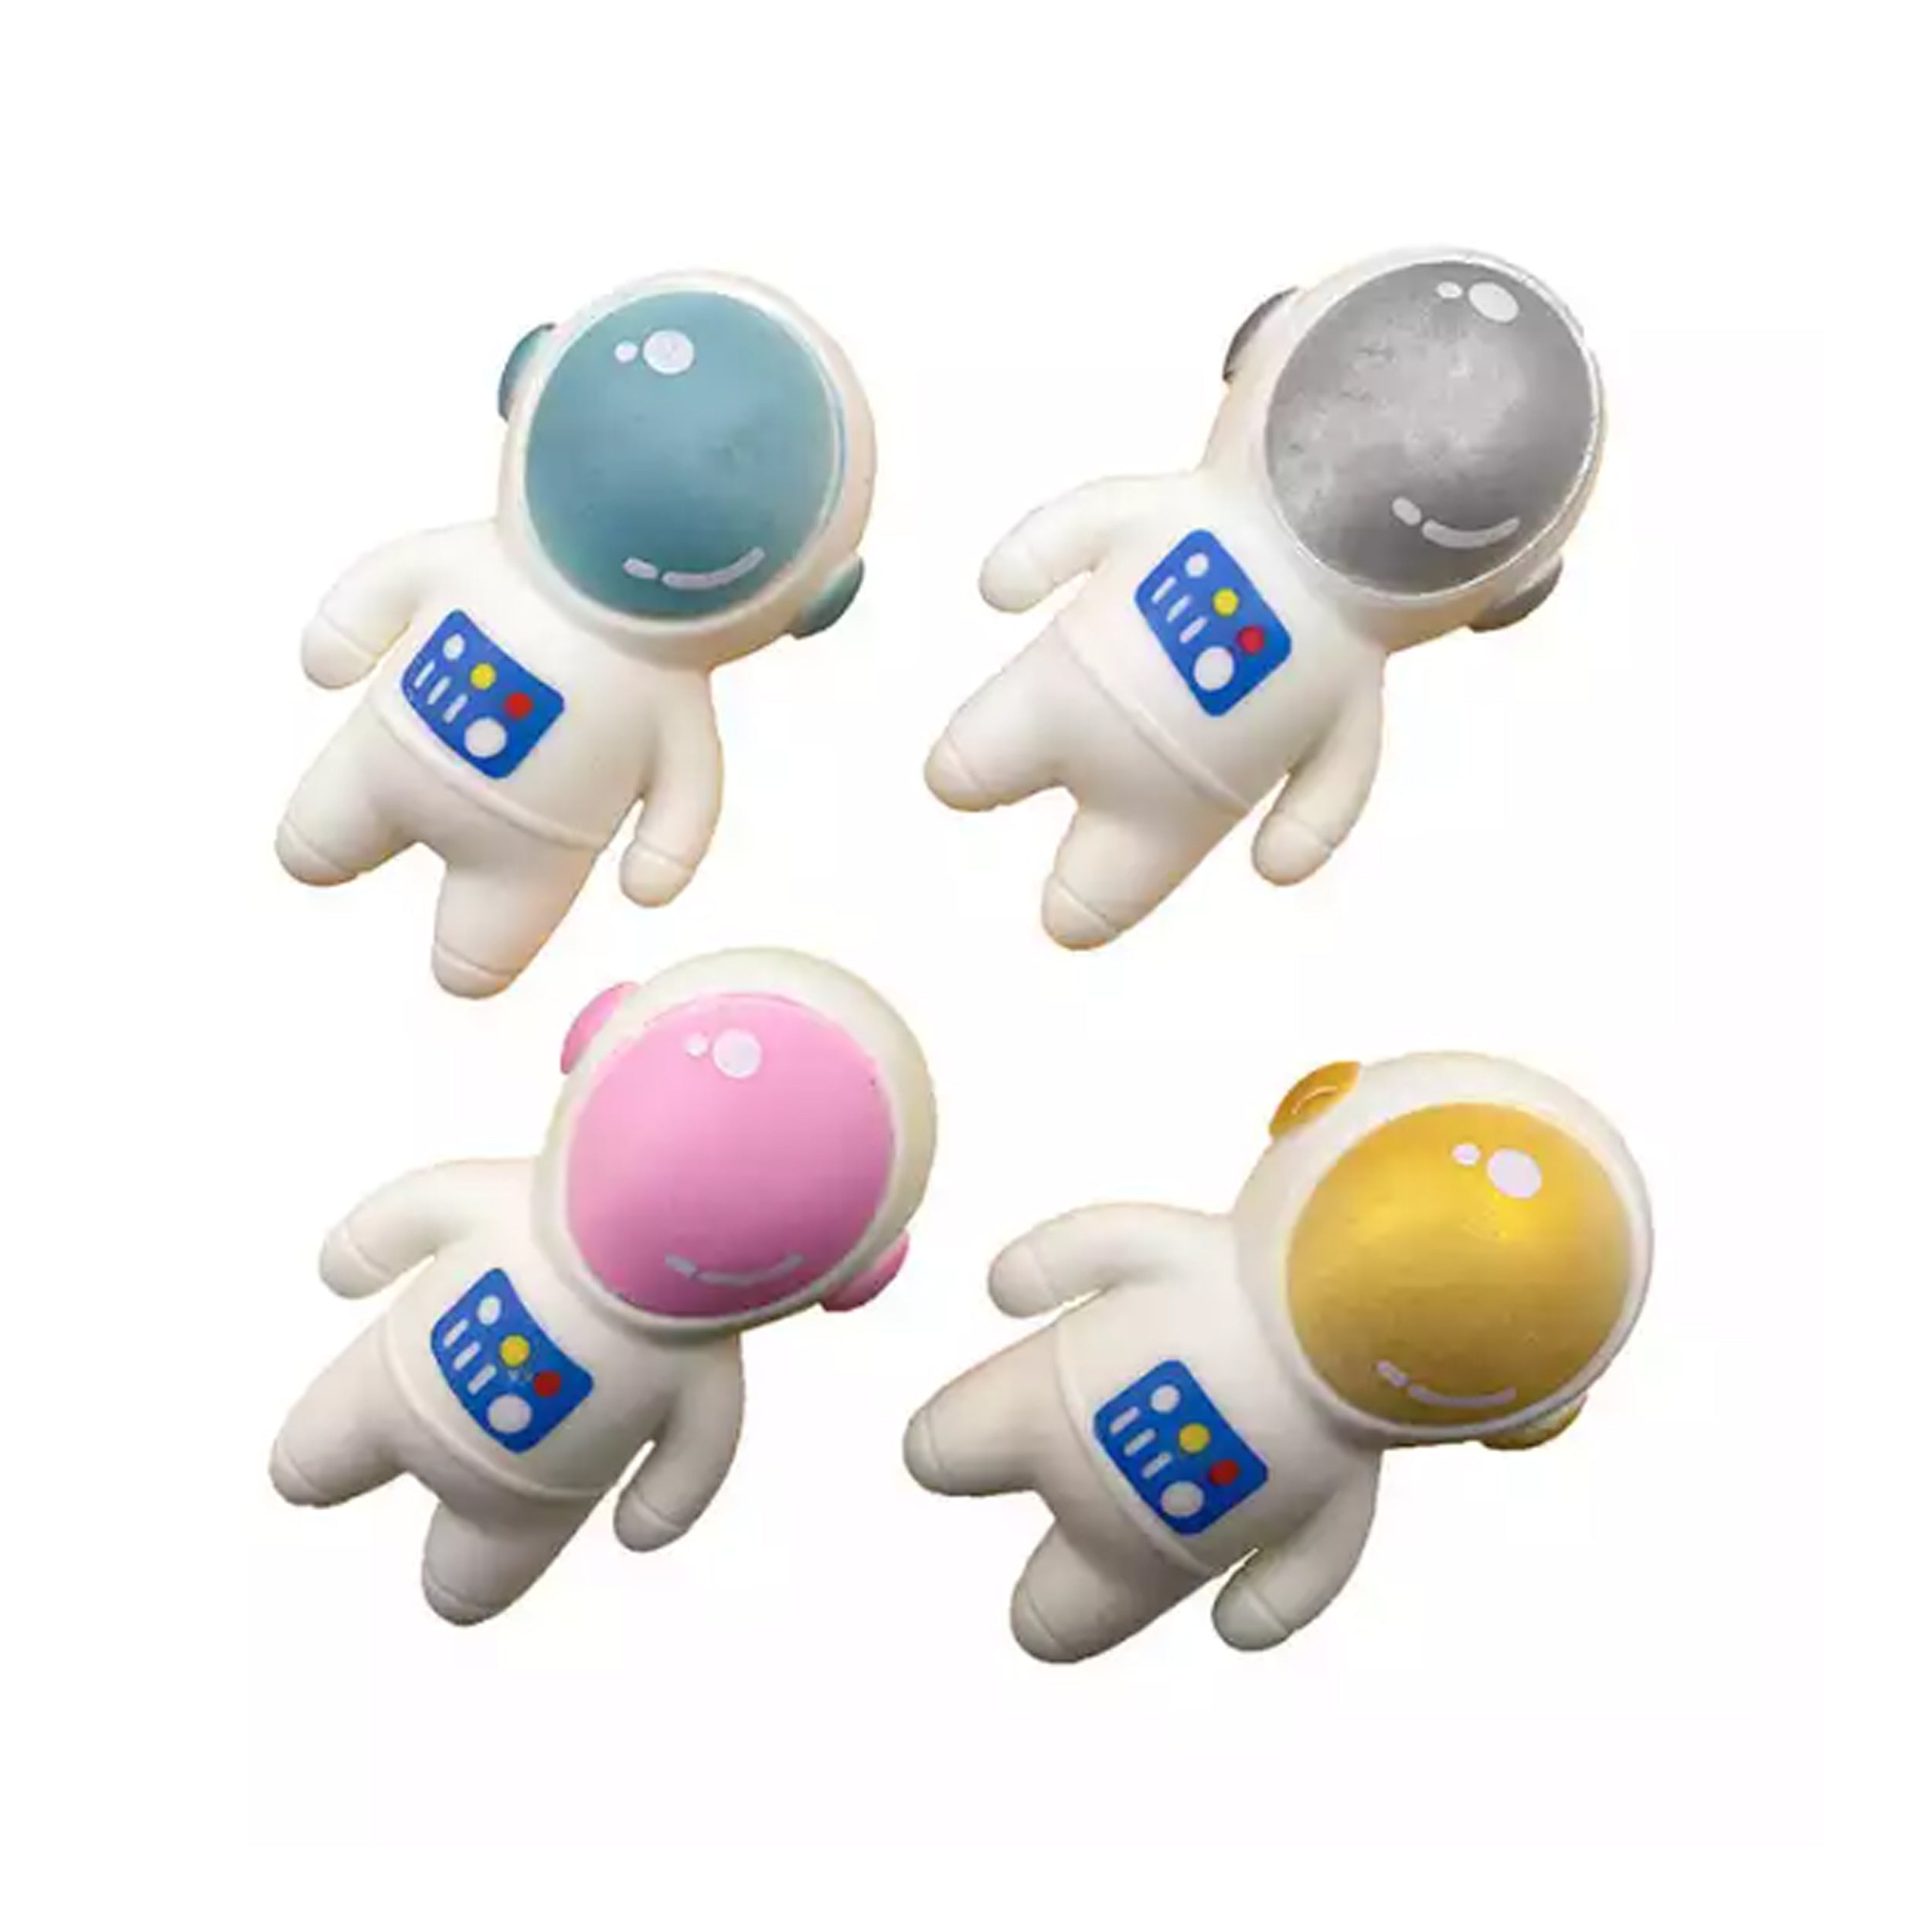 Relaxation with Astronauts Squishy Anti-Stress Fidget Toys for Kids